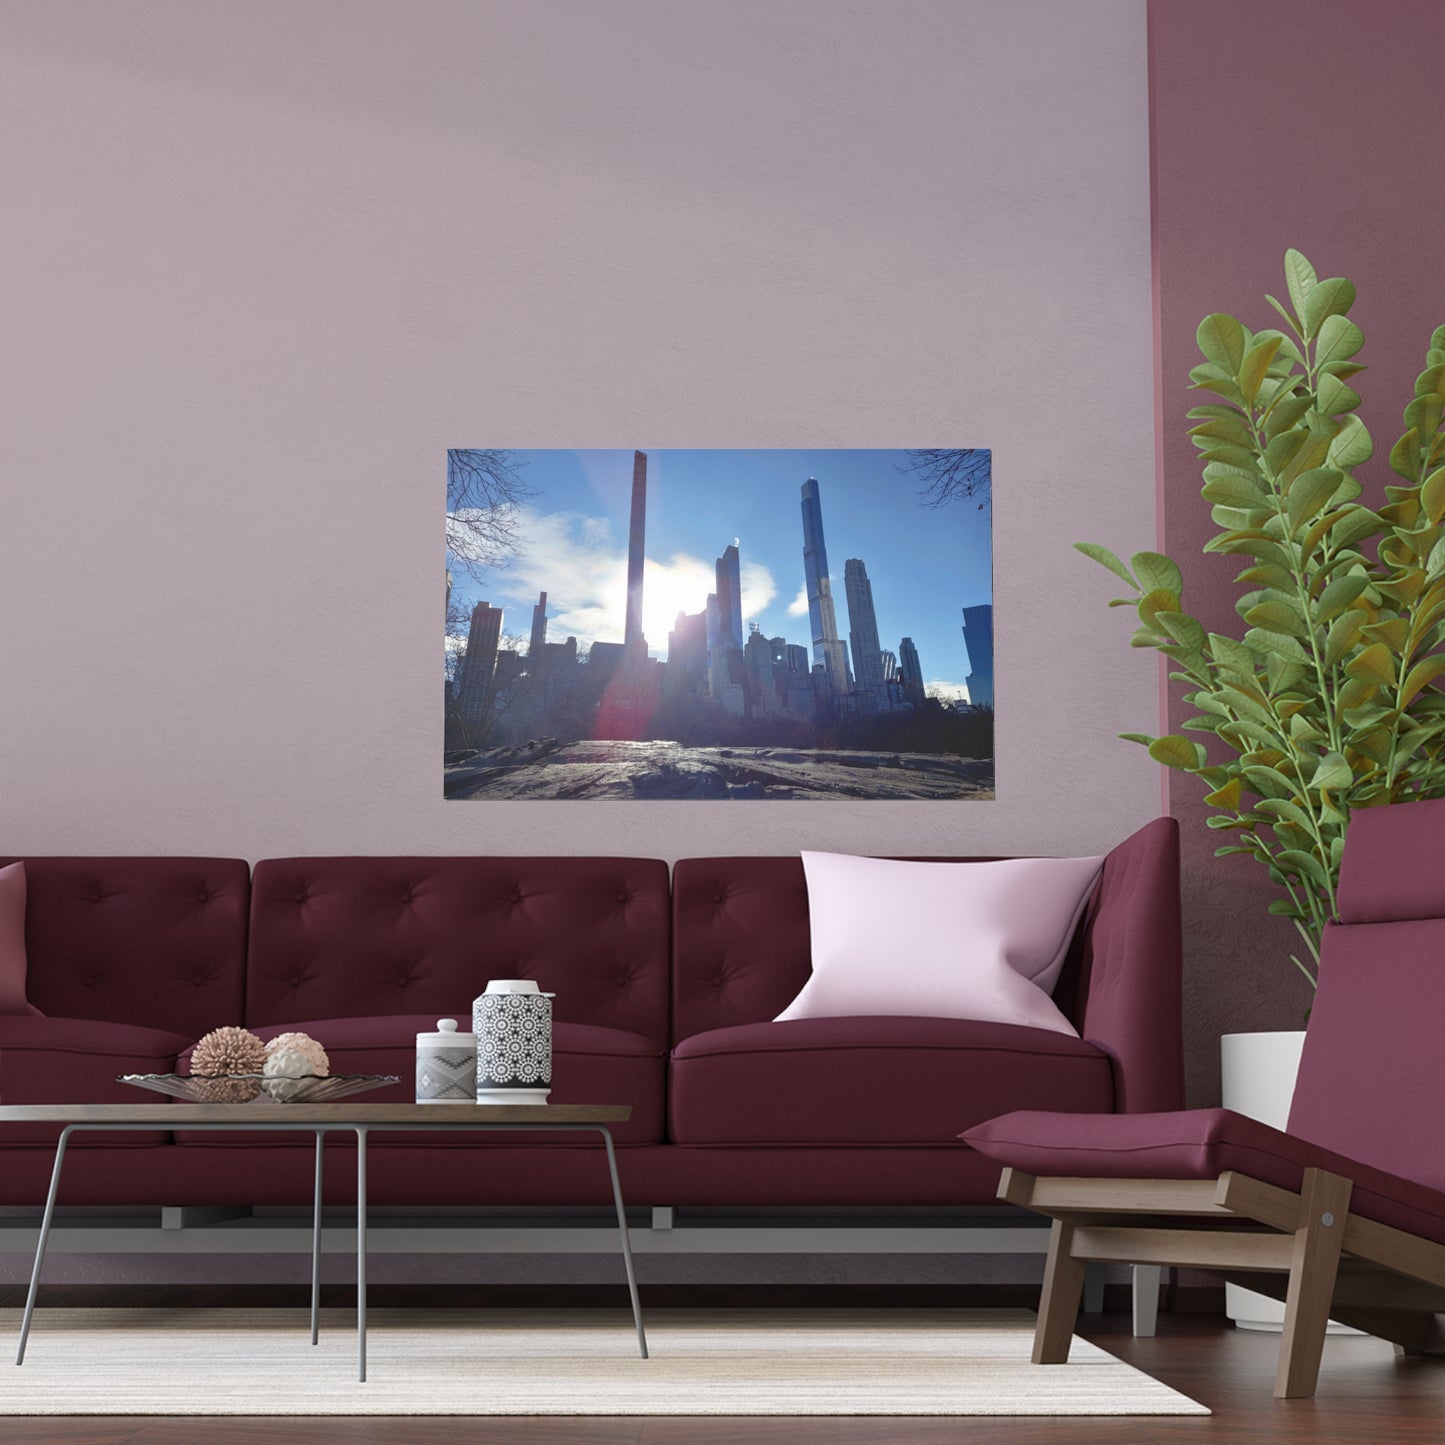 USA-HP-6 Indoor and Outdoor Silk Posters